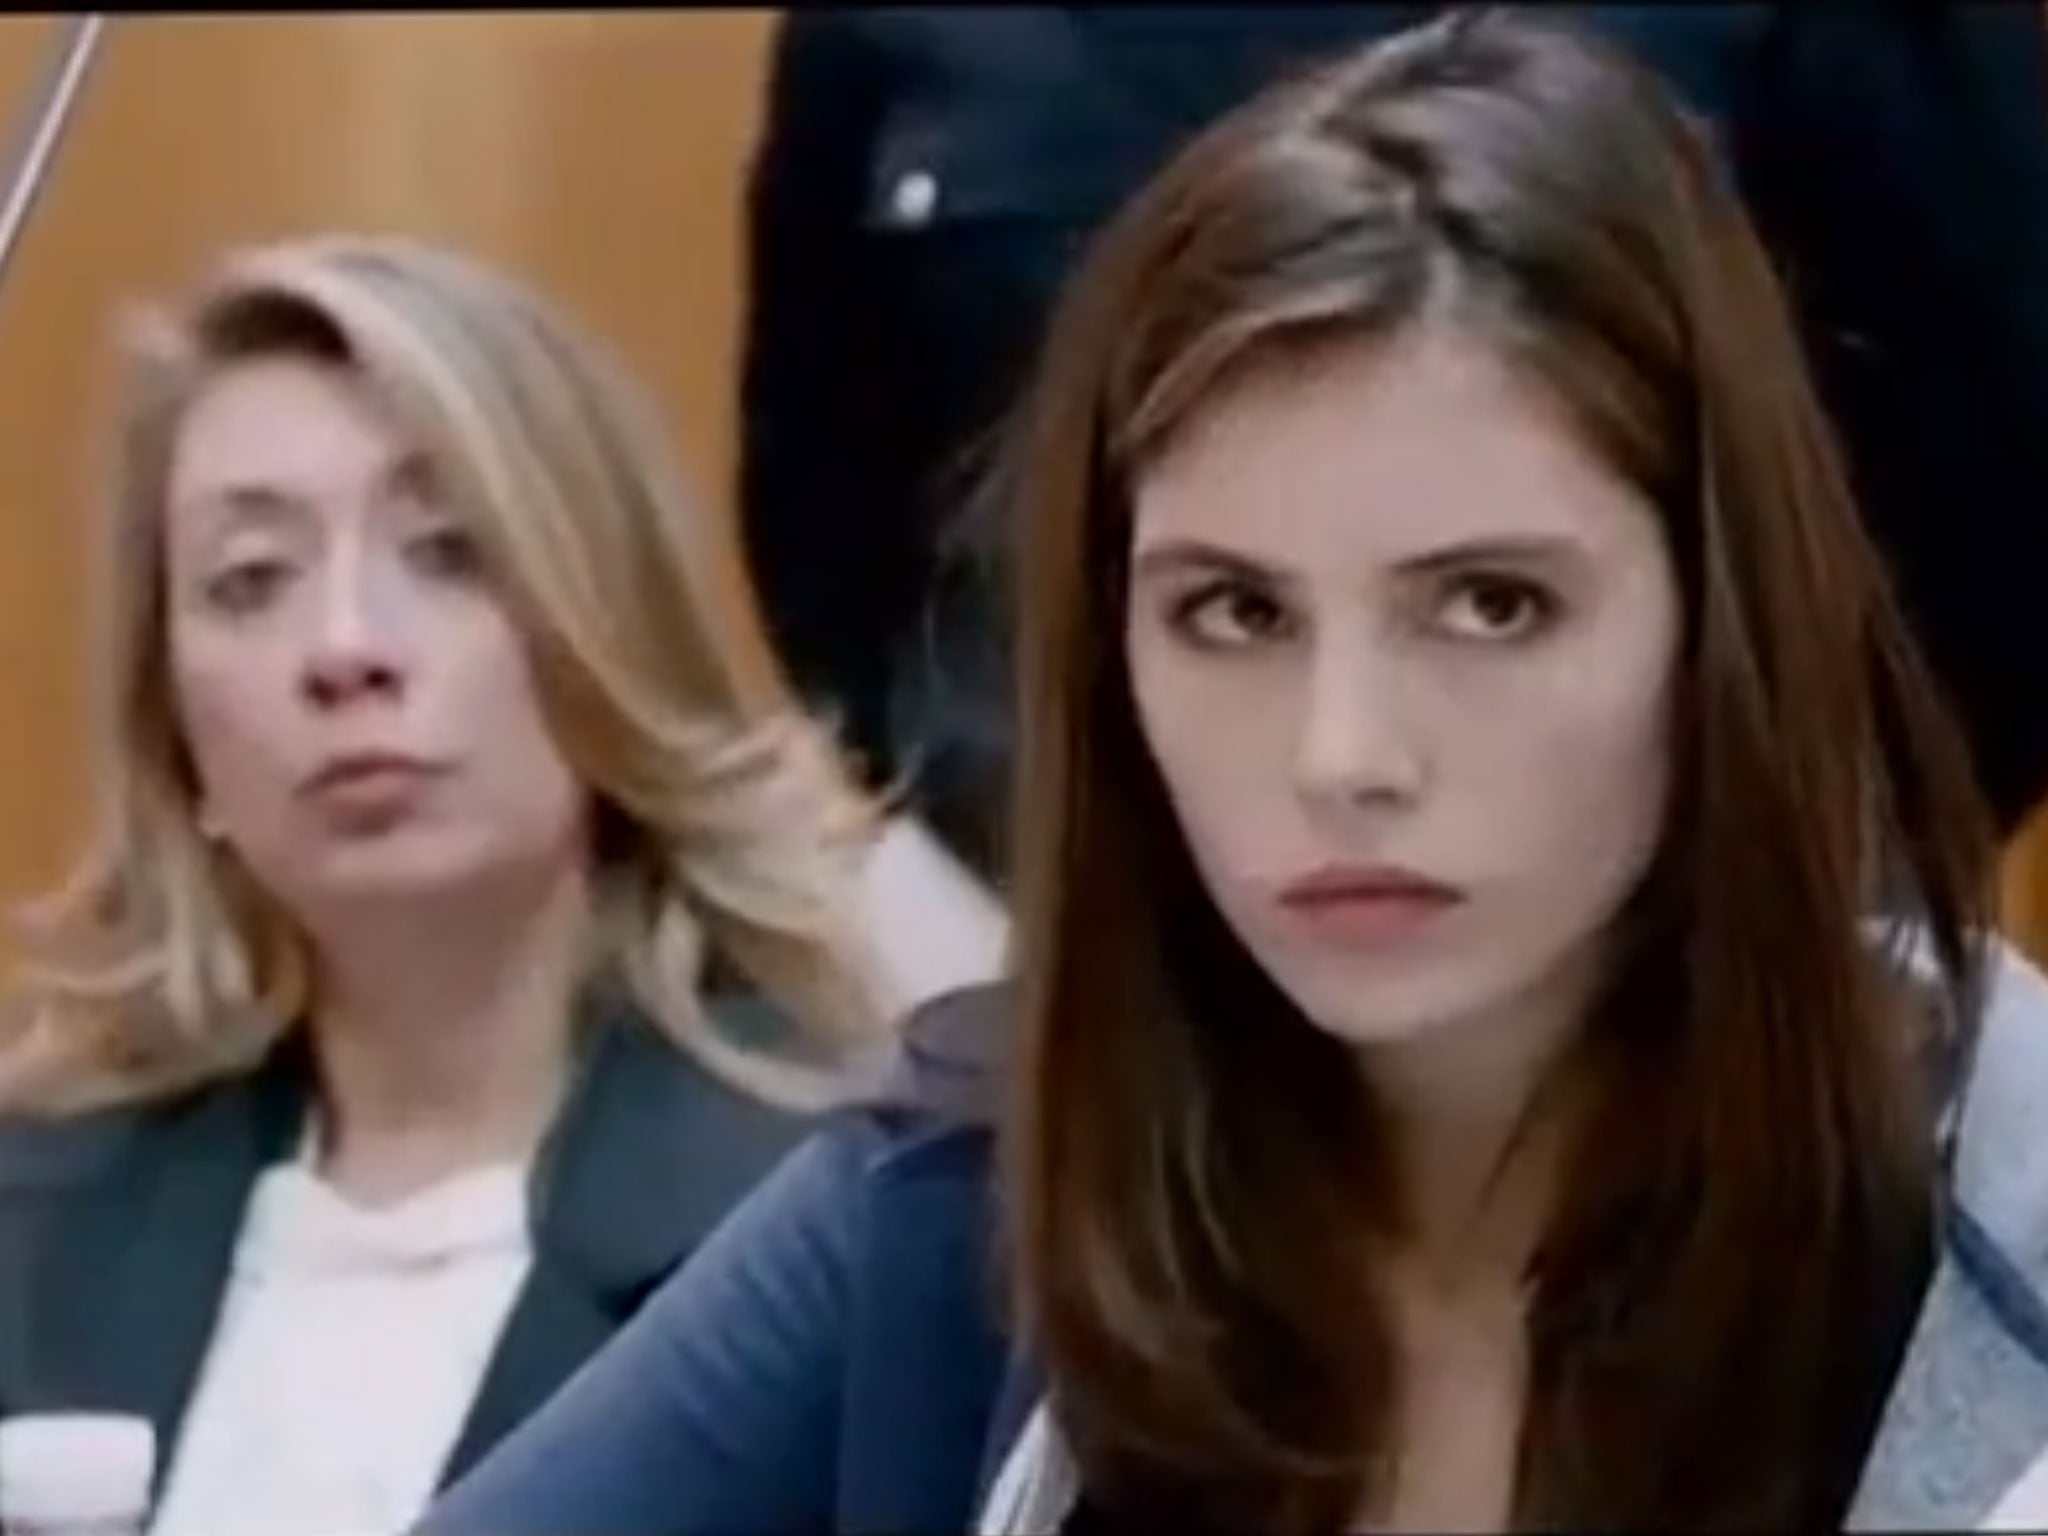 Actress Genevieve Gaunt in a court scene from Michael Winterbottom's forthcoming The Face of an Angel, loosely-based on the Amanda Knox trial